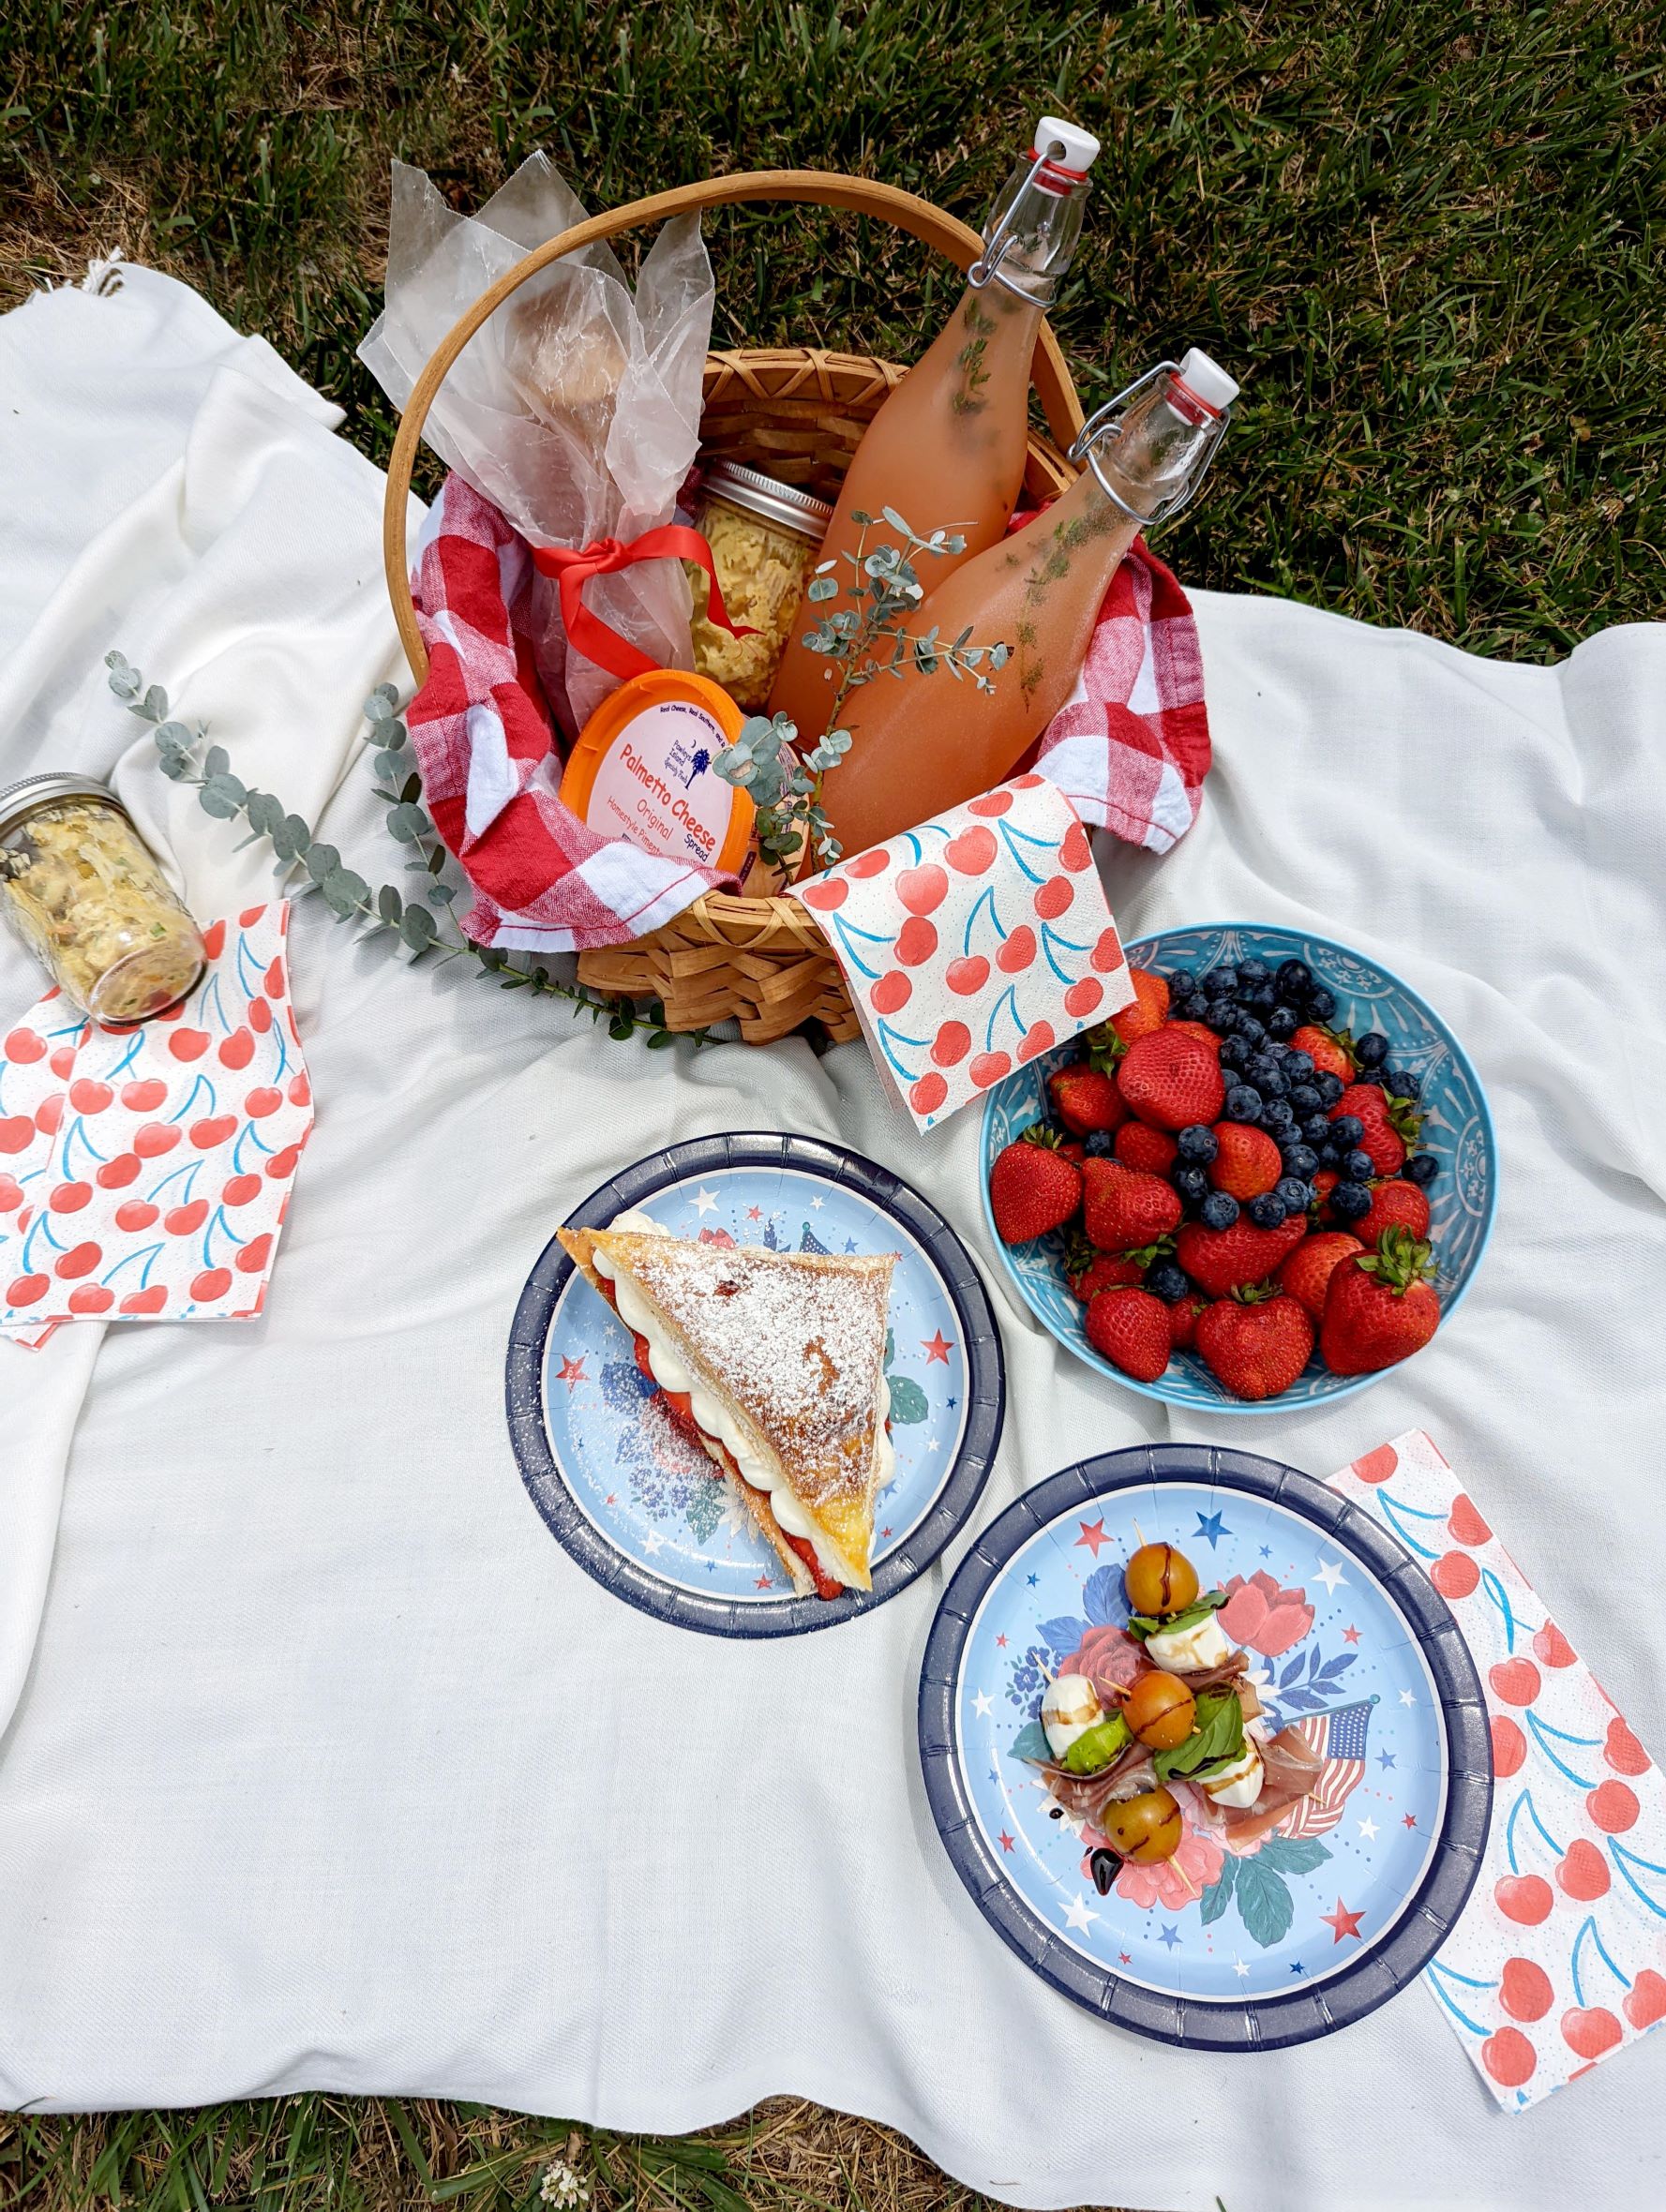 Products for a Fourth of July cookout